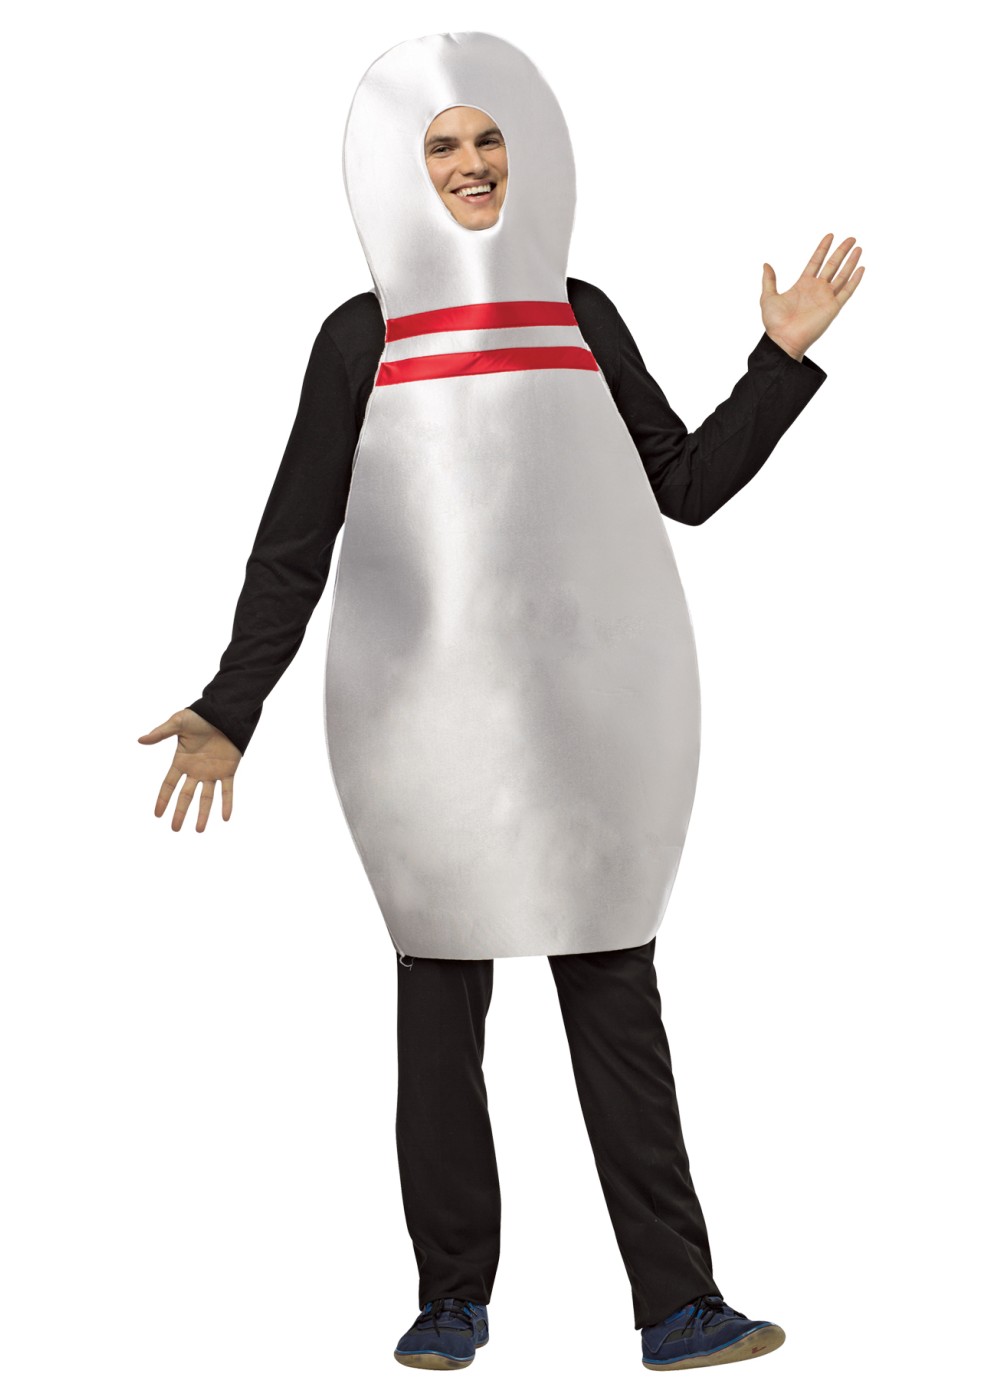 Bowling Pin Costume - Funny Costumes